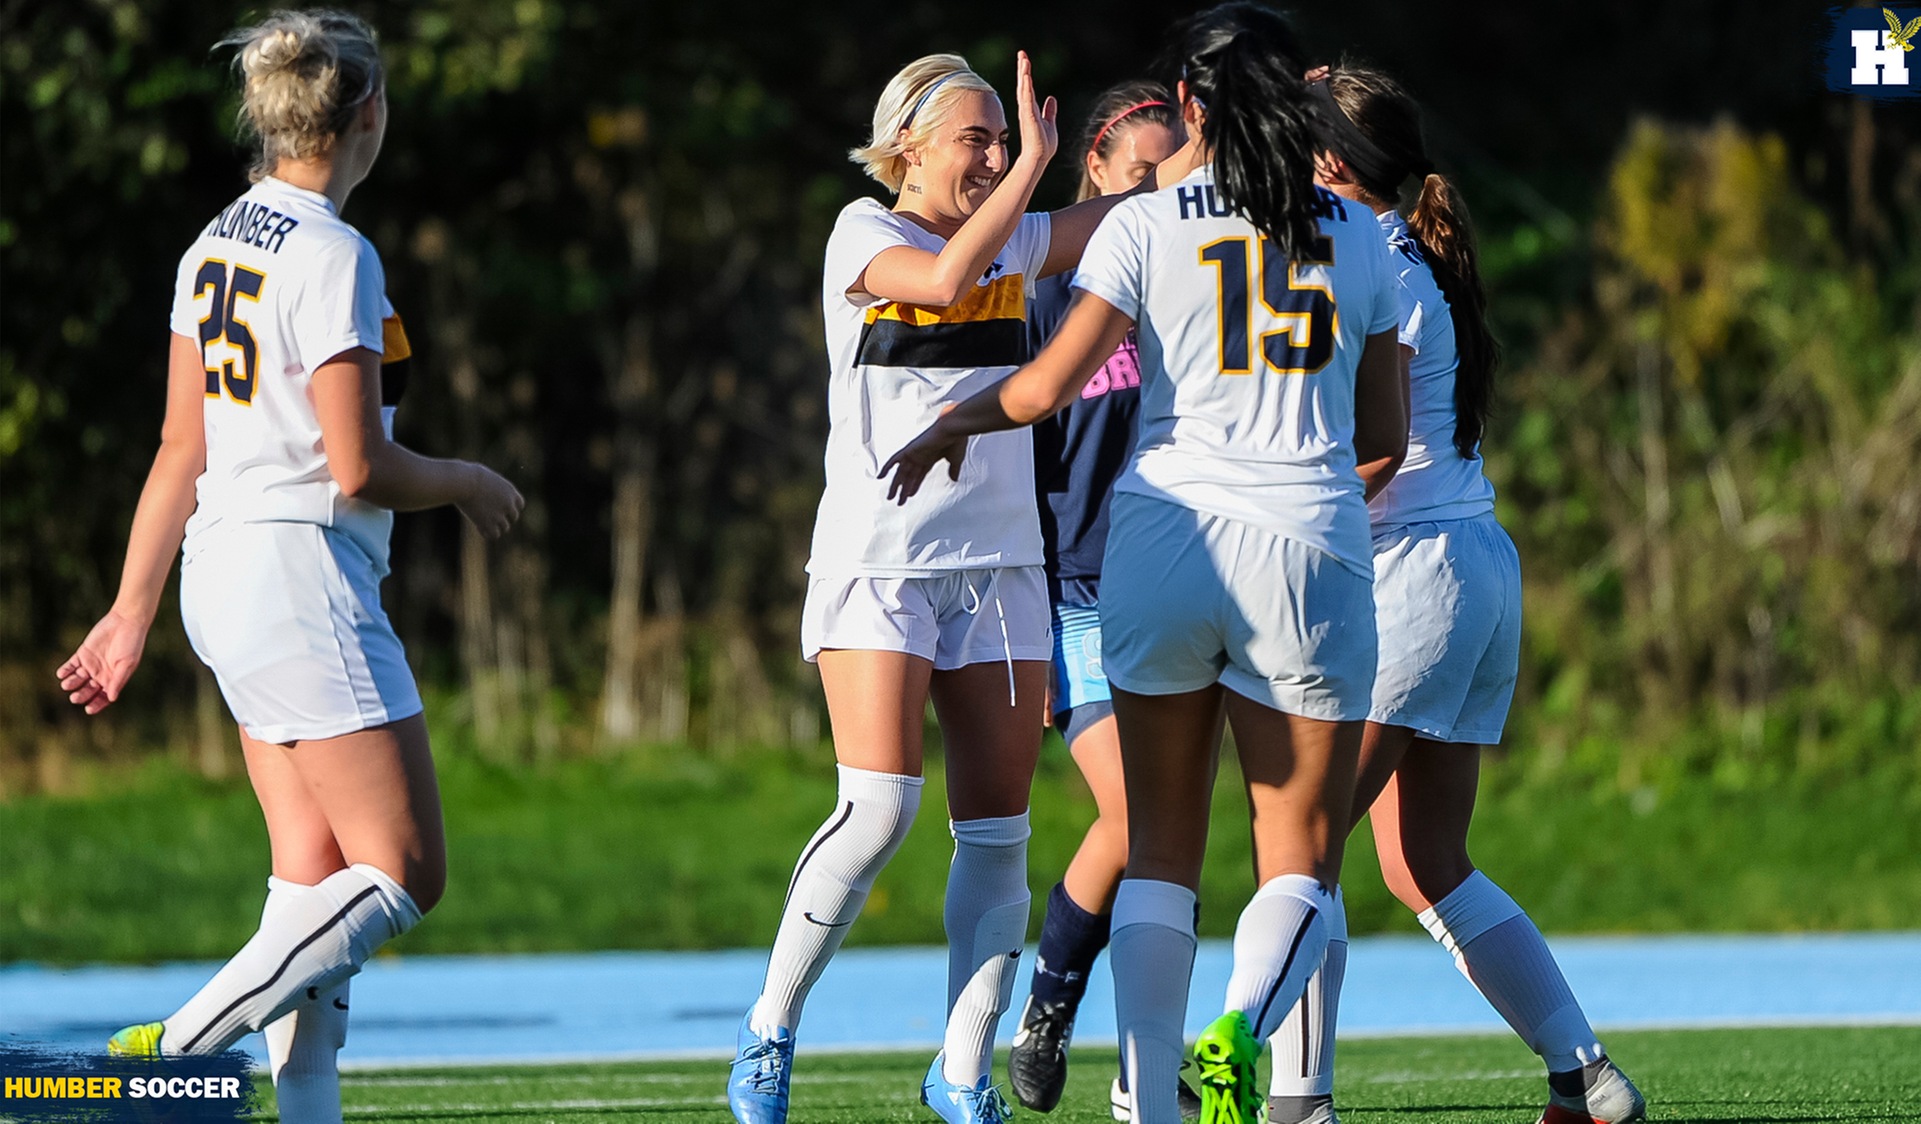 No. 4 WOMEN’S SOCCER CONCLUDE HISTORIC SEASON WITH WIN AT No. 11 SHERIDAN